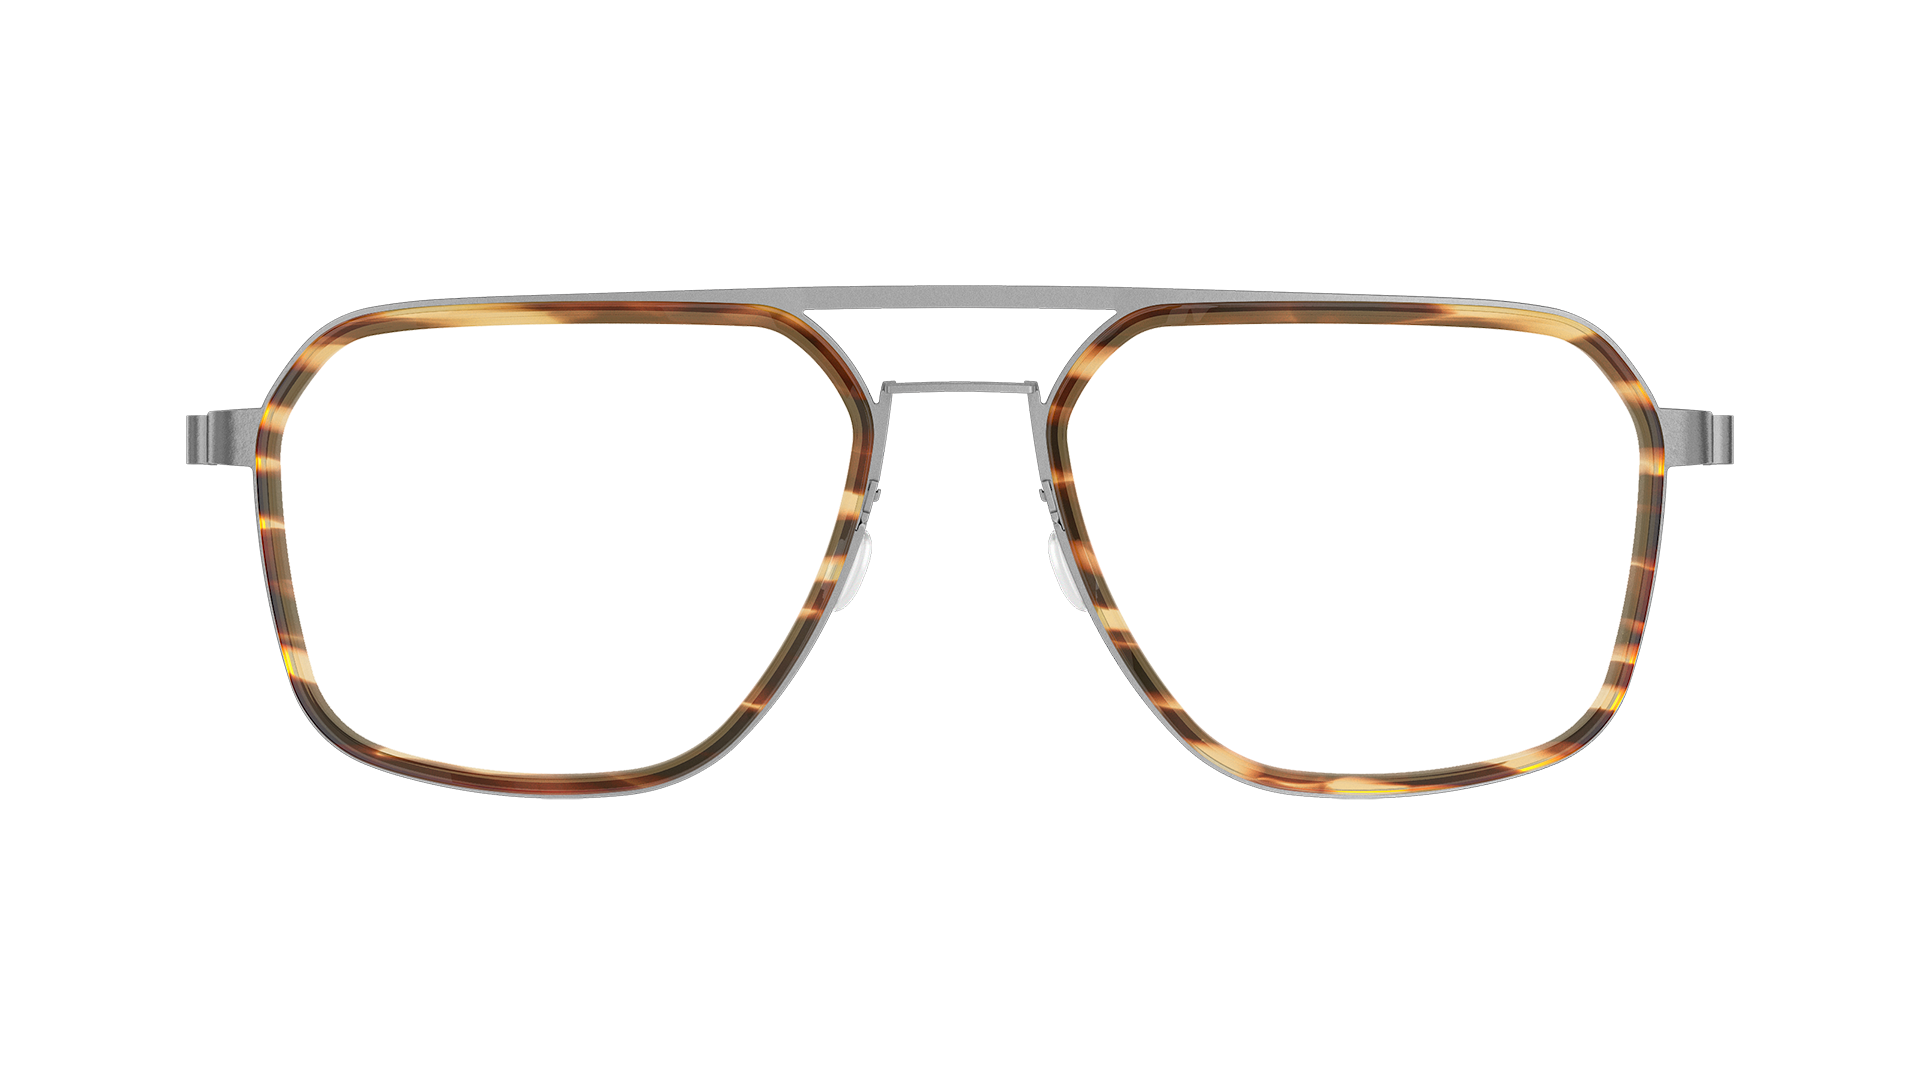 LINDBERG strip Model 9753 double bar rim silver titanium glasses in a rounded square shape